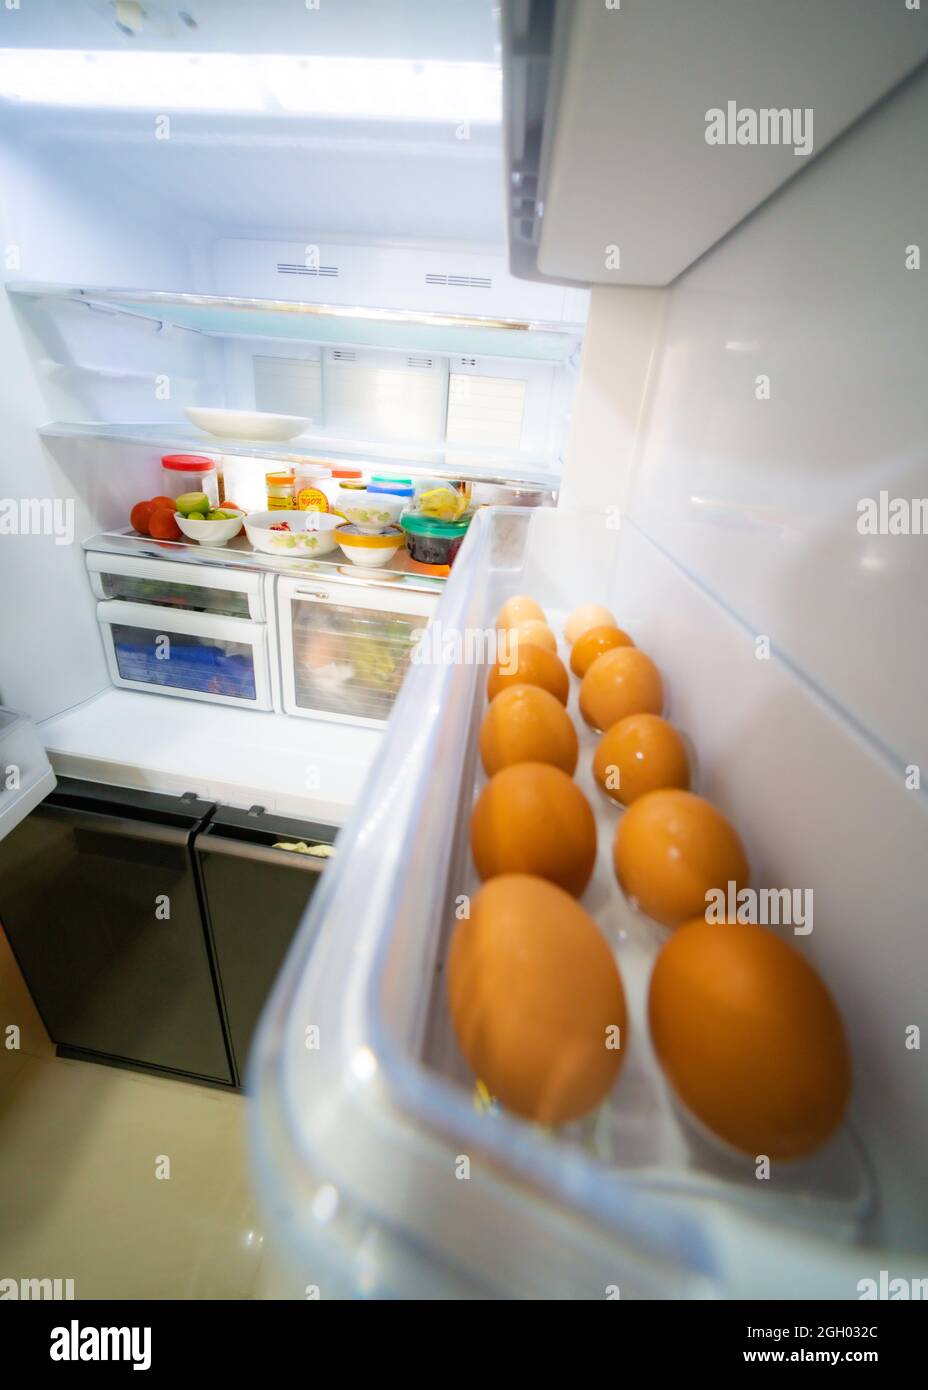 Food inside refrigerator in the kitchen Stock Photo